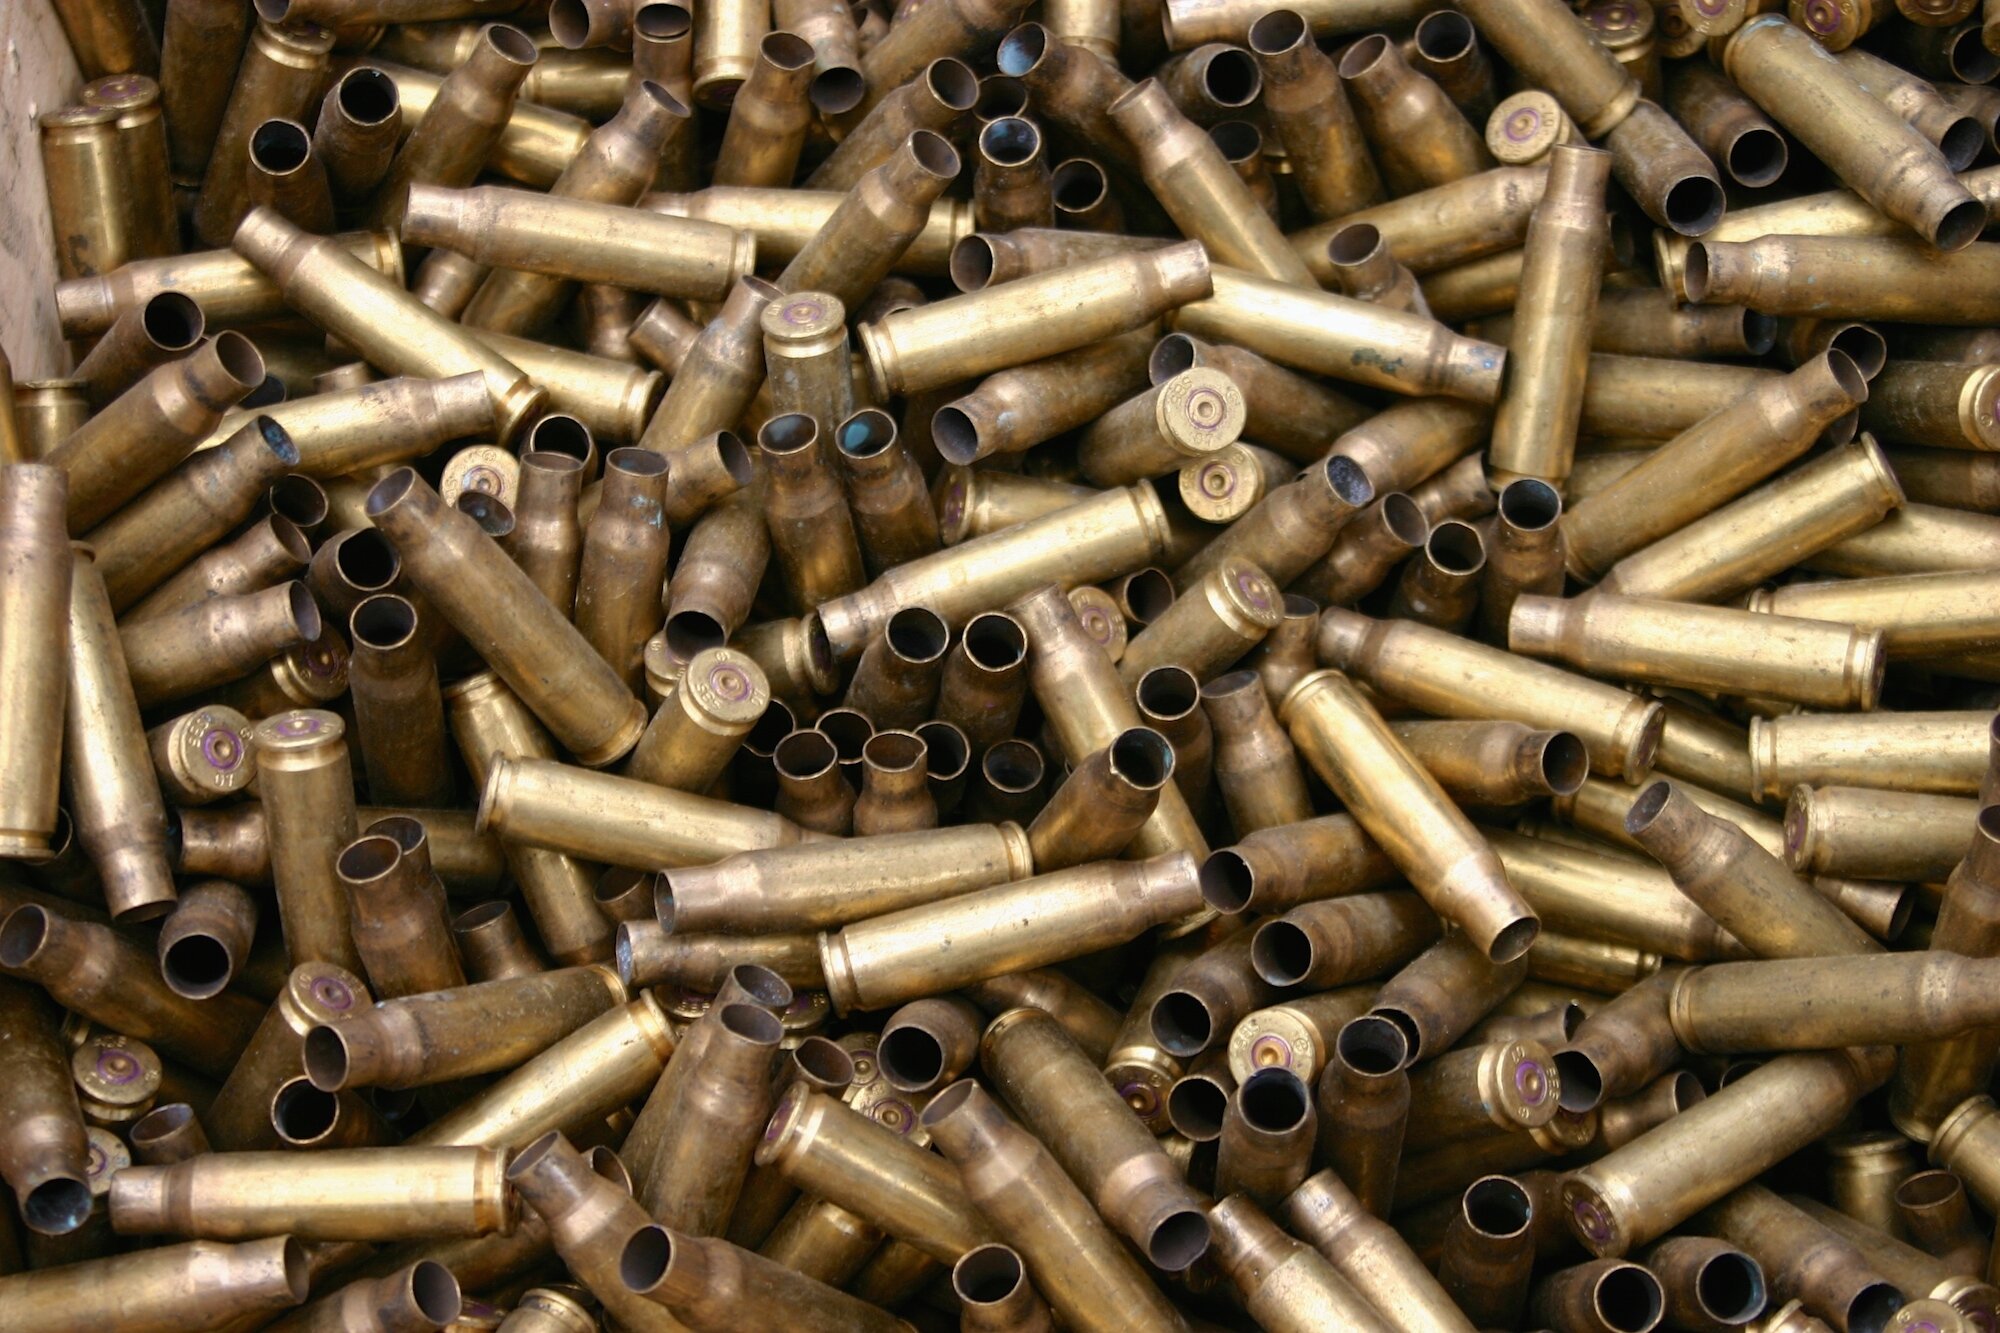 How To Dispose of Bullets and Recycle Brass Shell Casings » Super